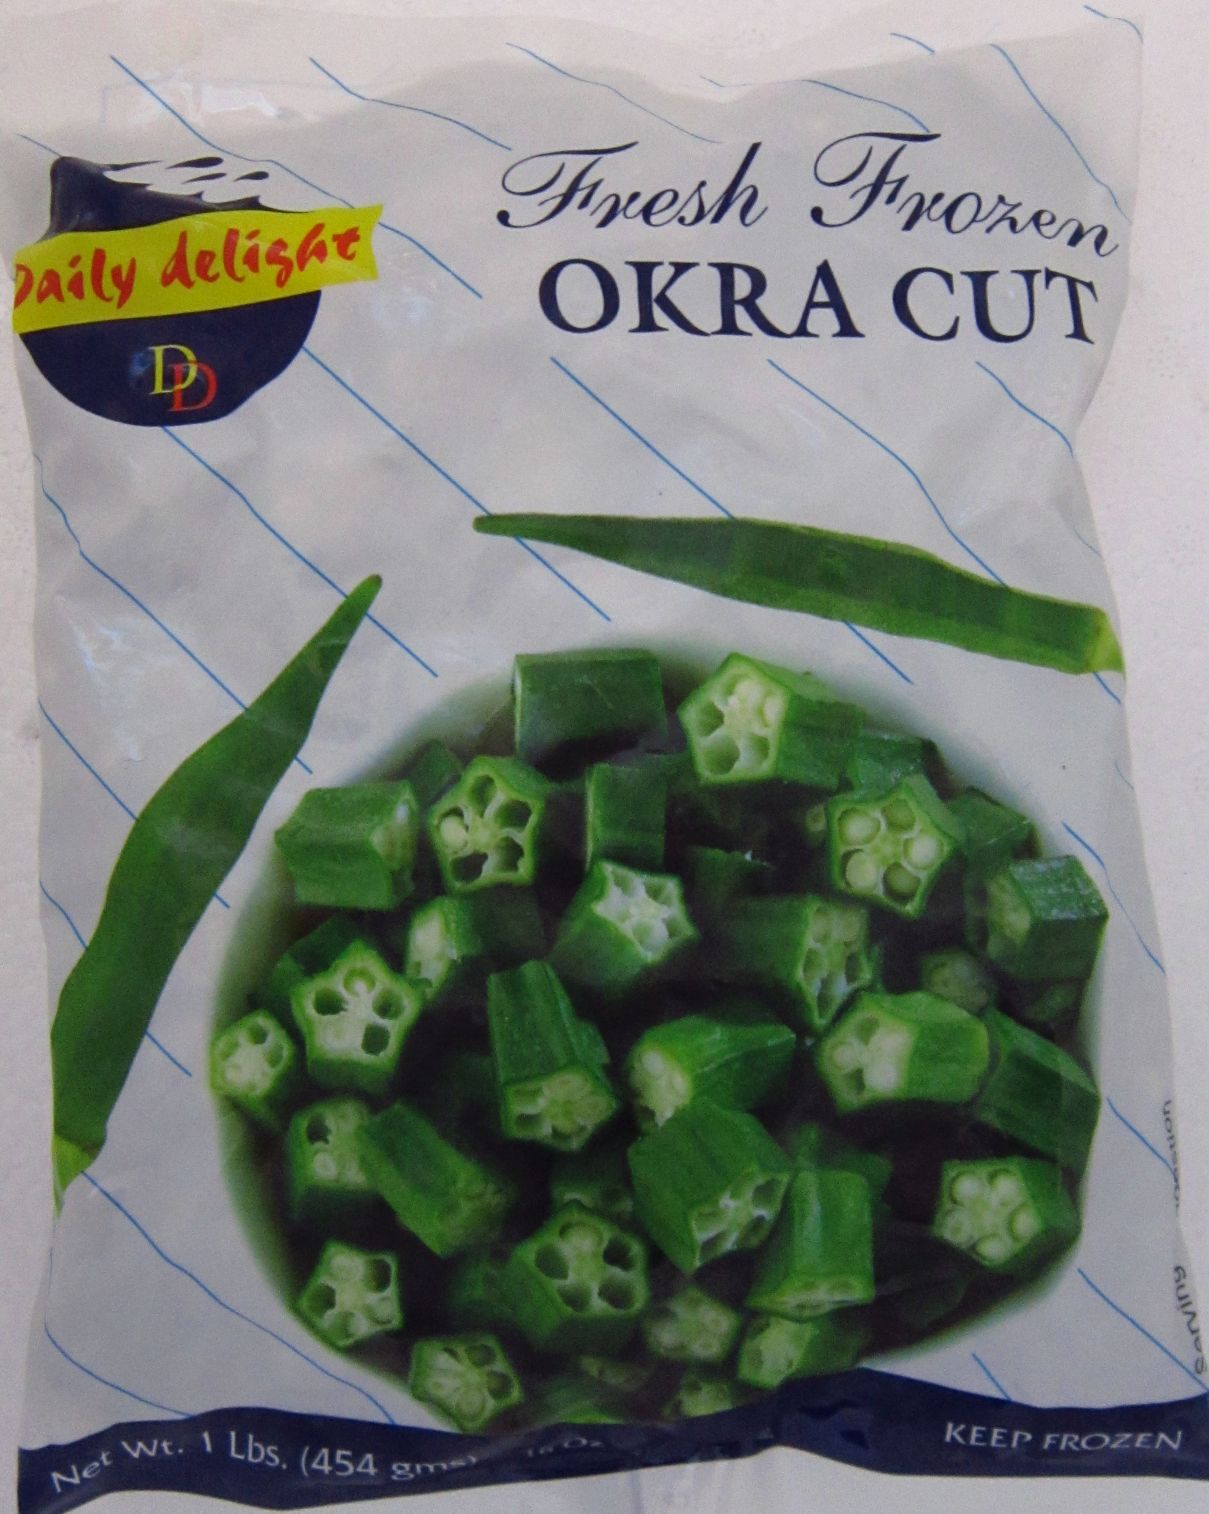 Daily Delight Okra Cut Image